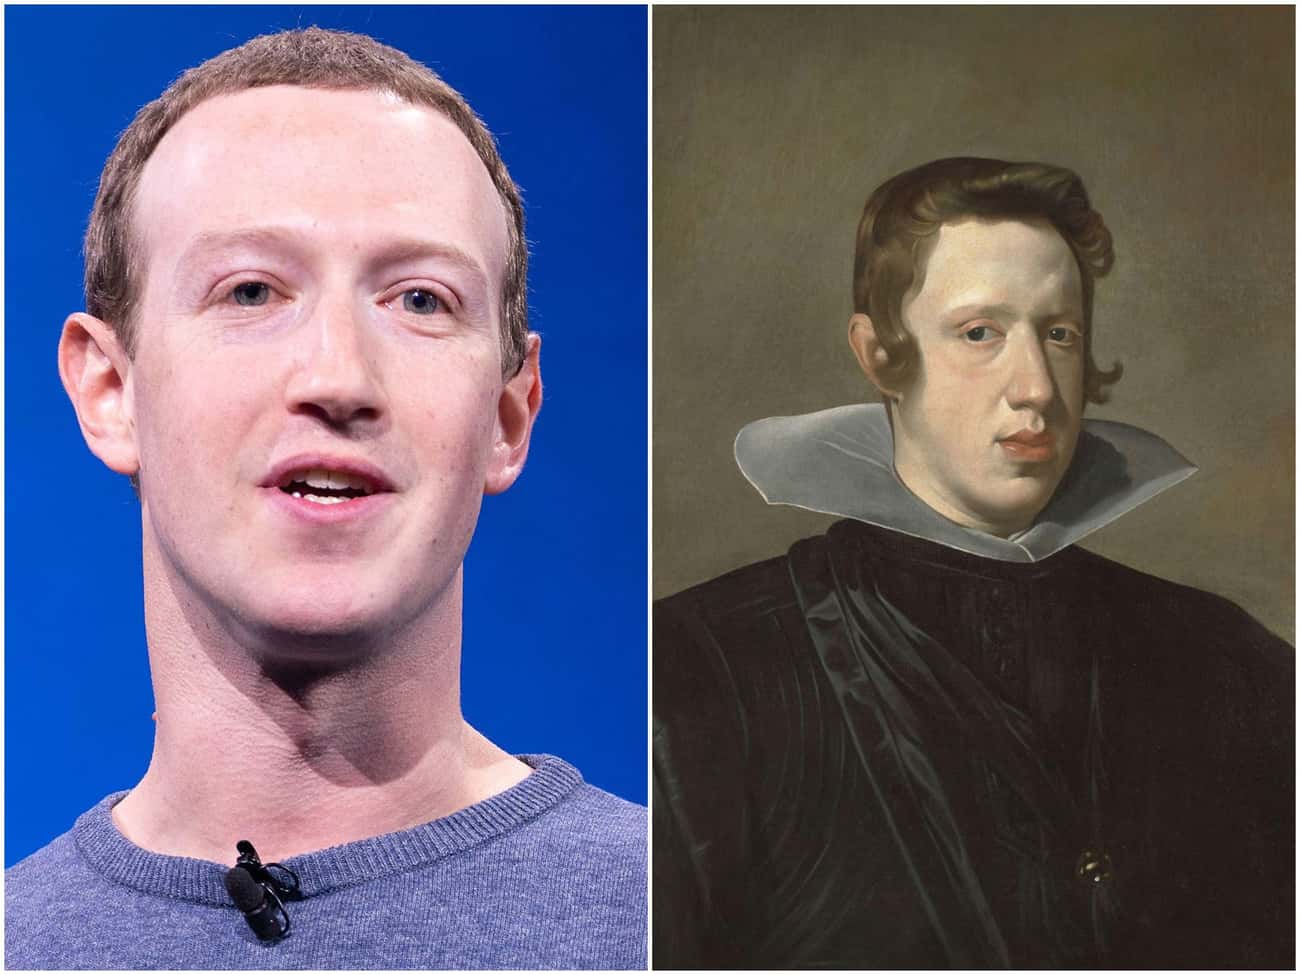 Zuckerberg And Philip IV - Just Two Kings With The Same Face